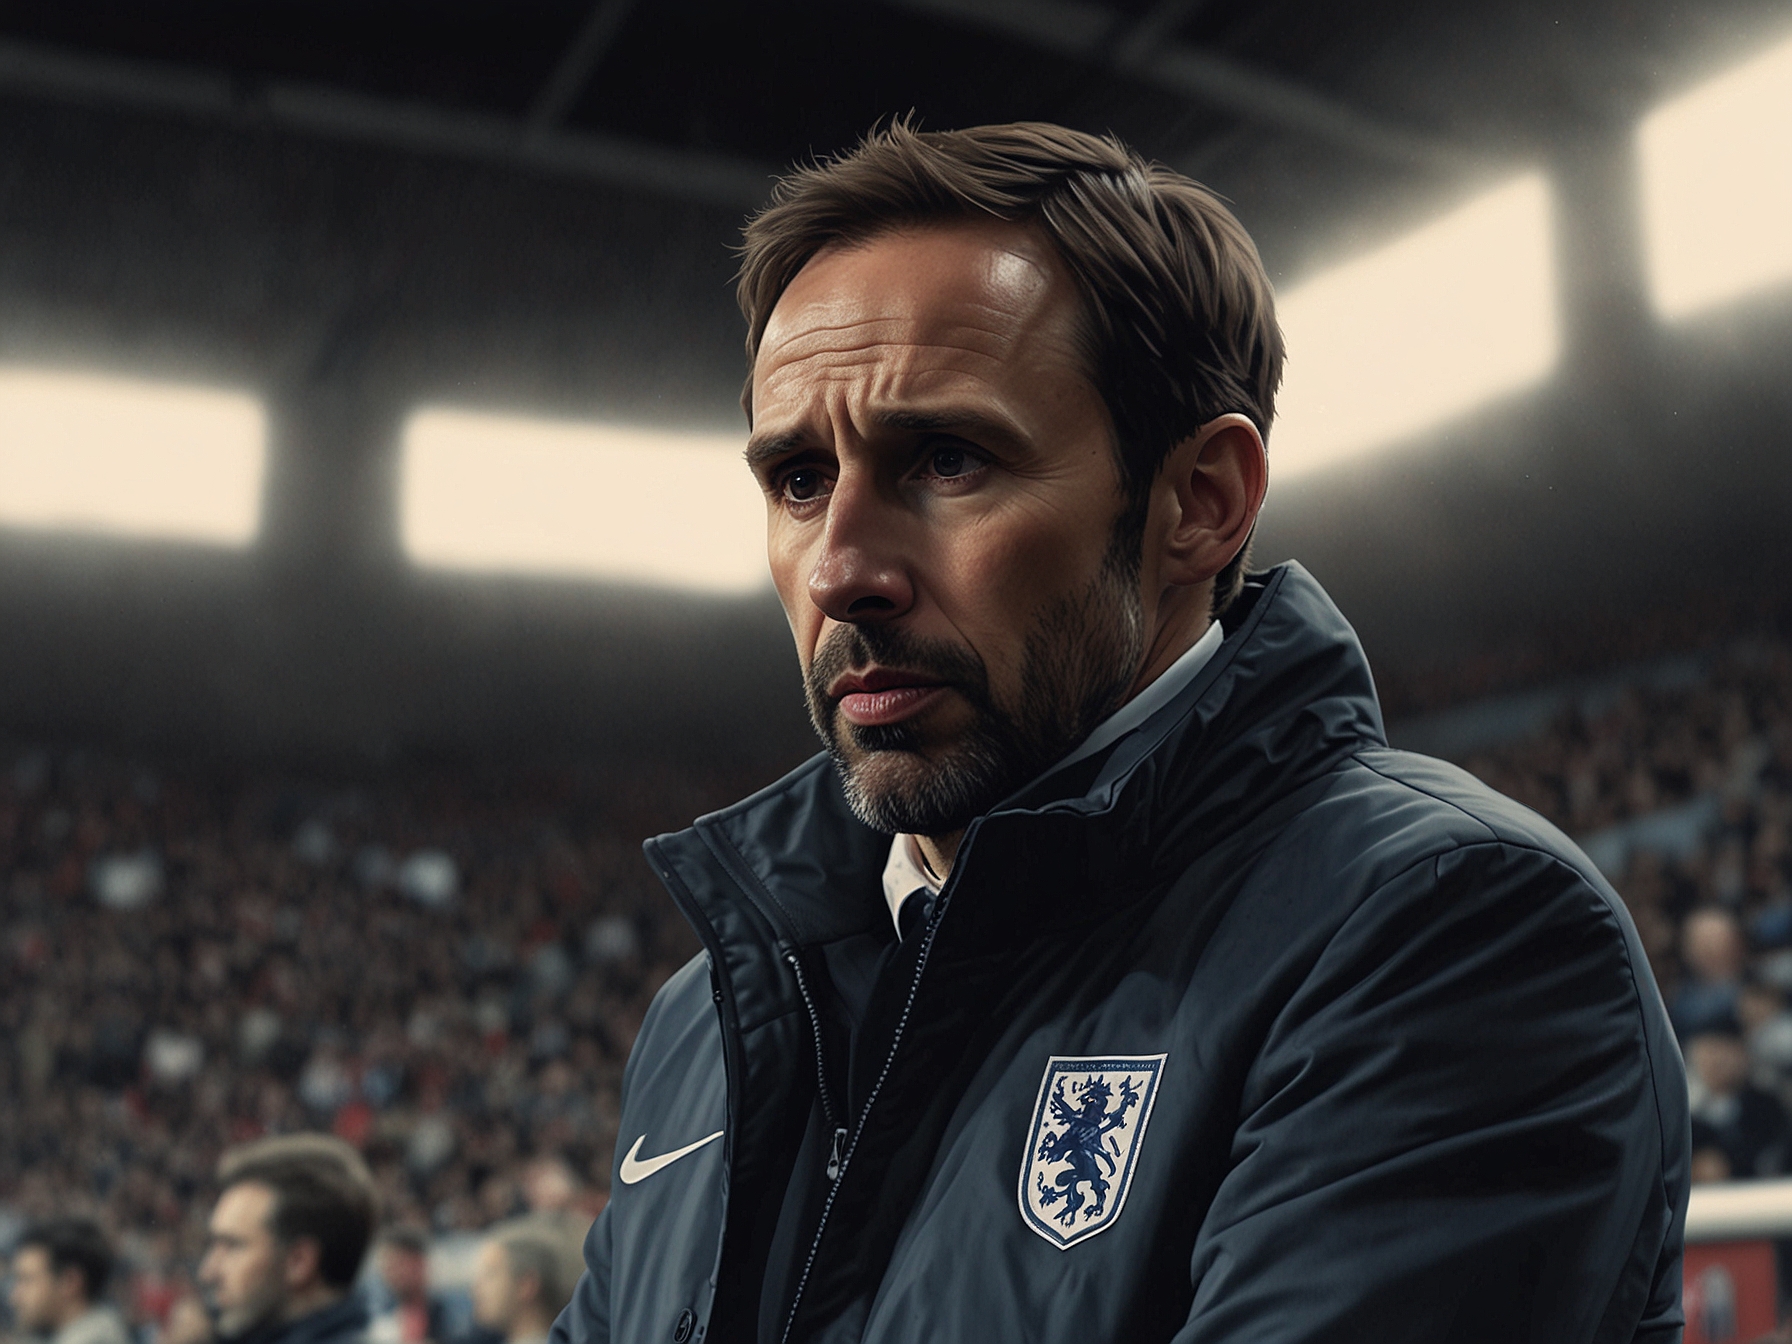 A snapshot of England manager Gareth Southgate on the sideline during the Denmark match, appearing deep in thought and concerned about his team's tactical execution.